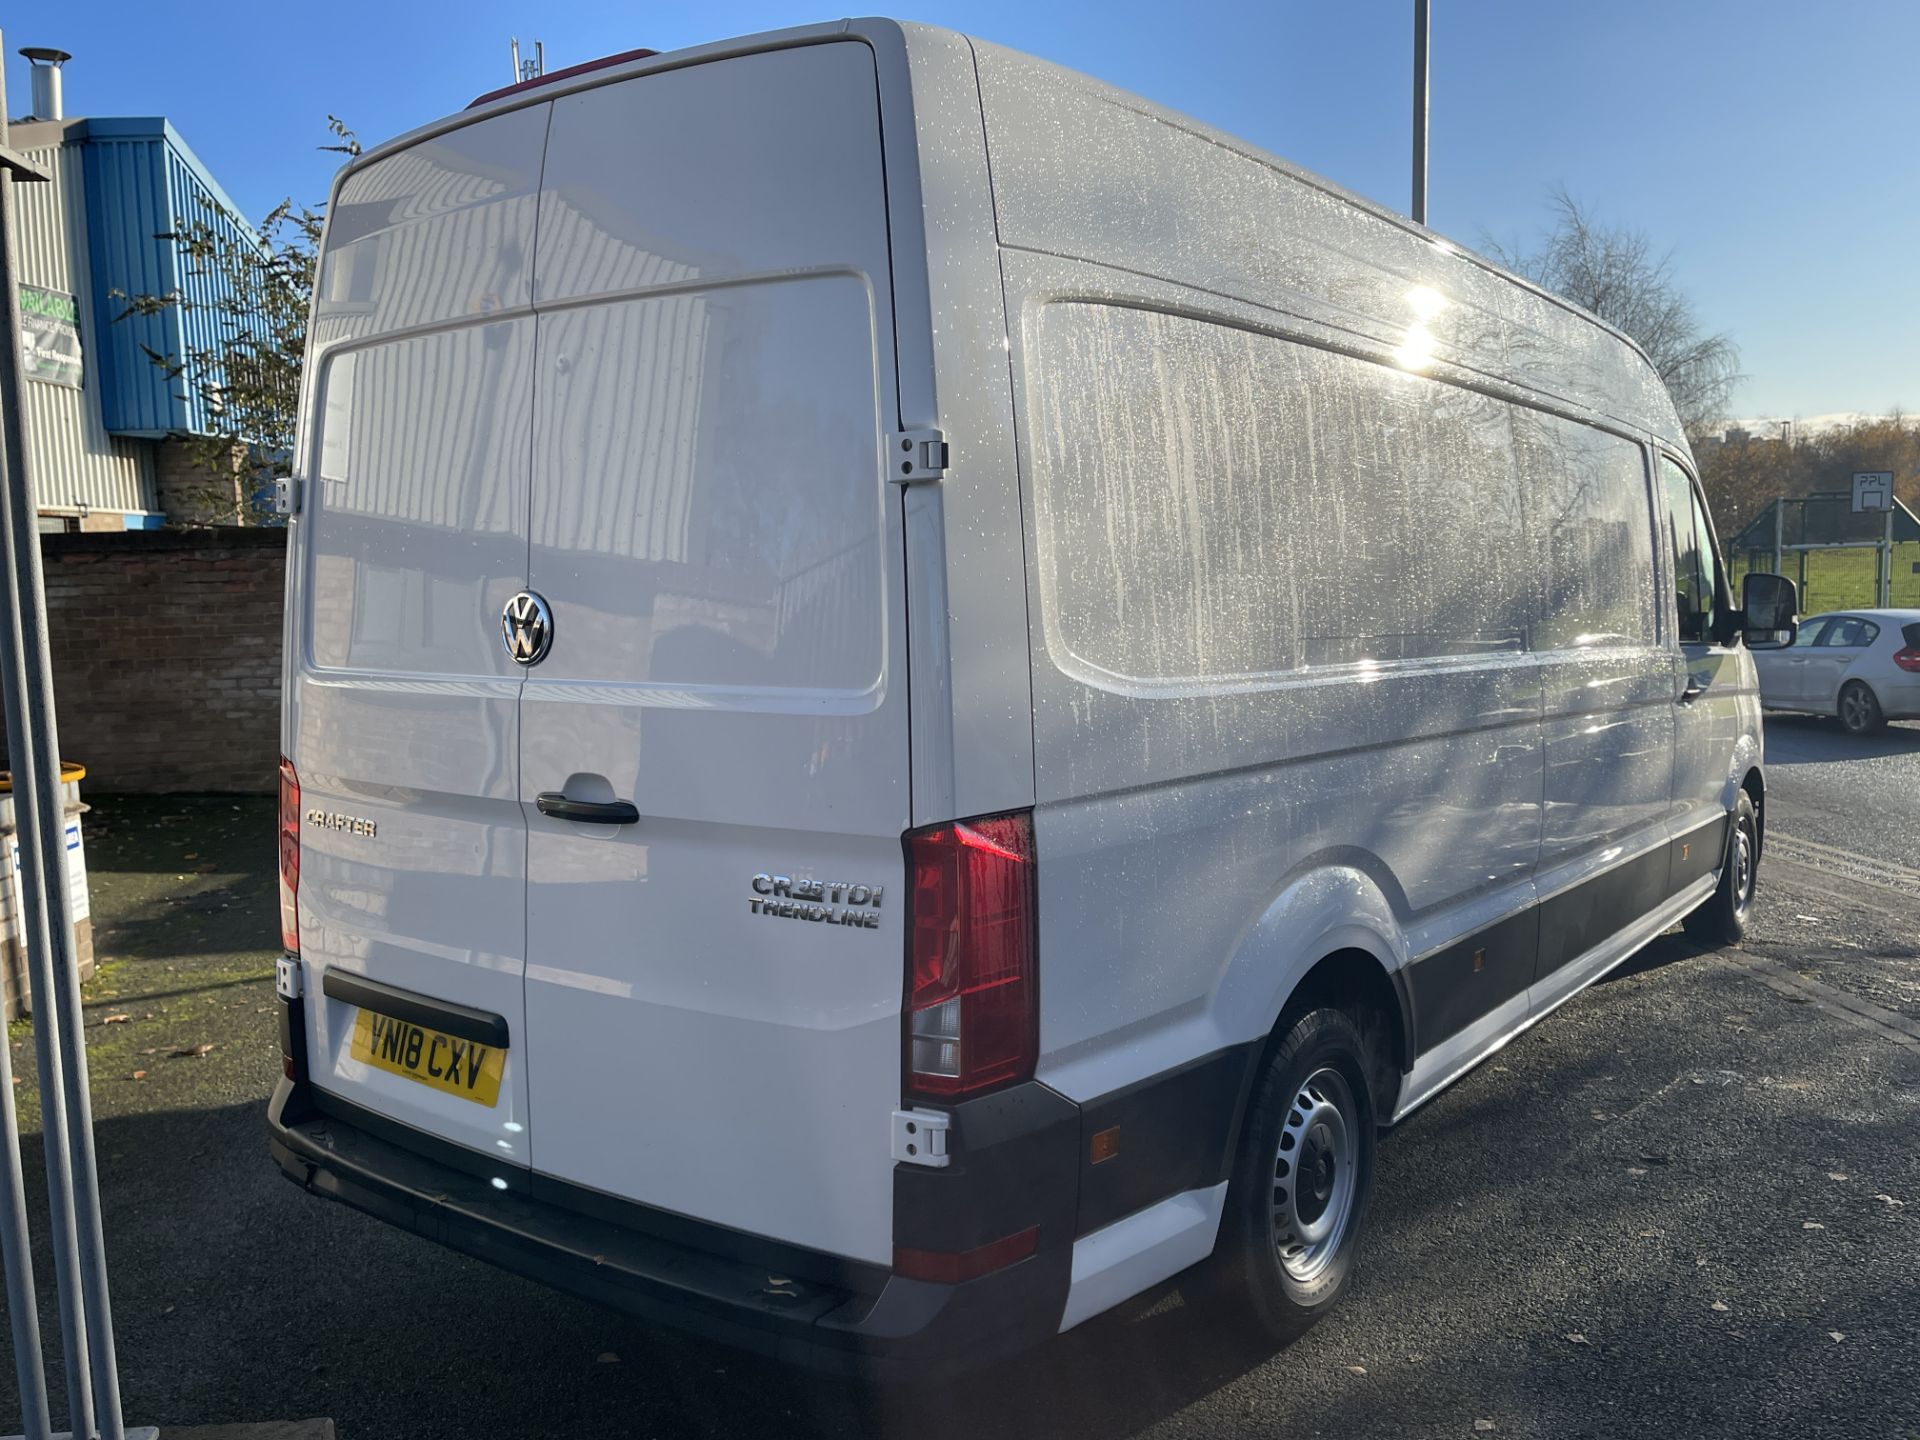 2018 - VW Crafter CR35 102PS Trend Line LWB TDI - Image 8 of 34